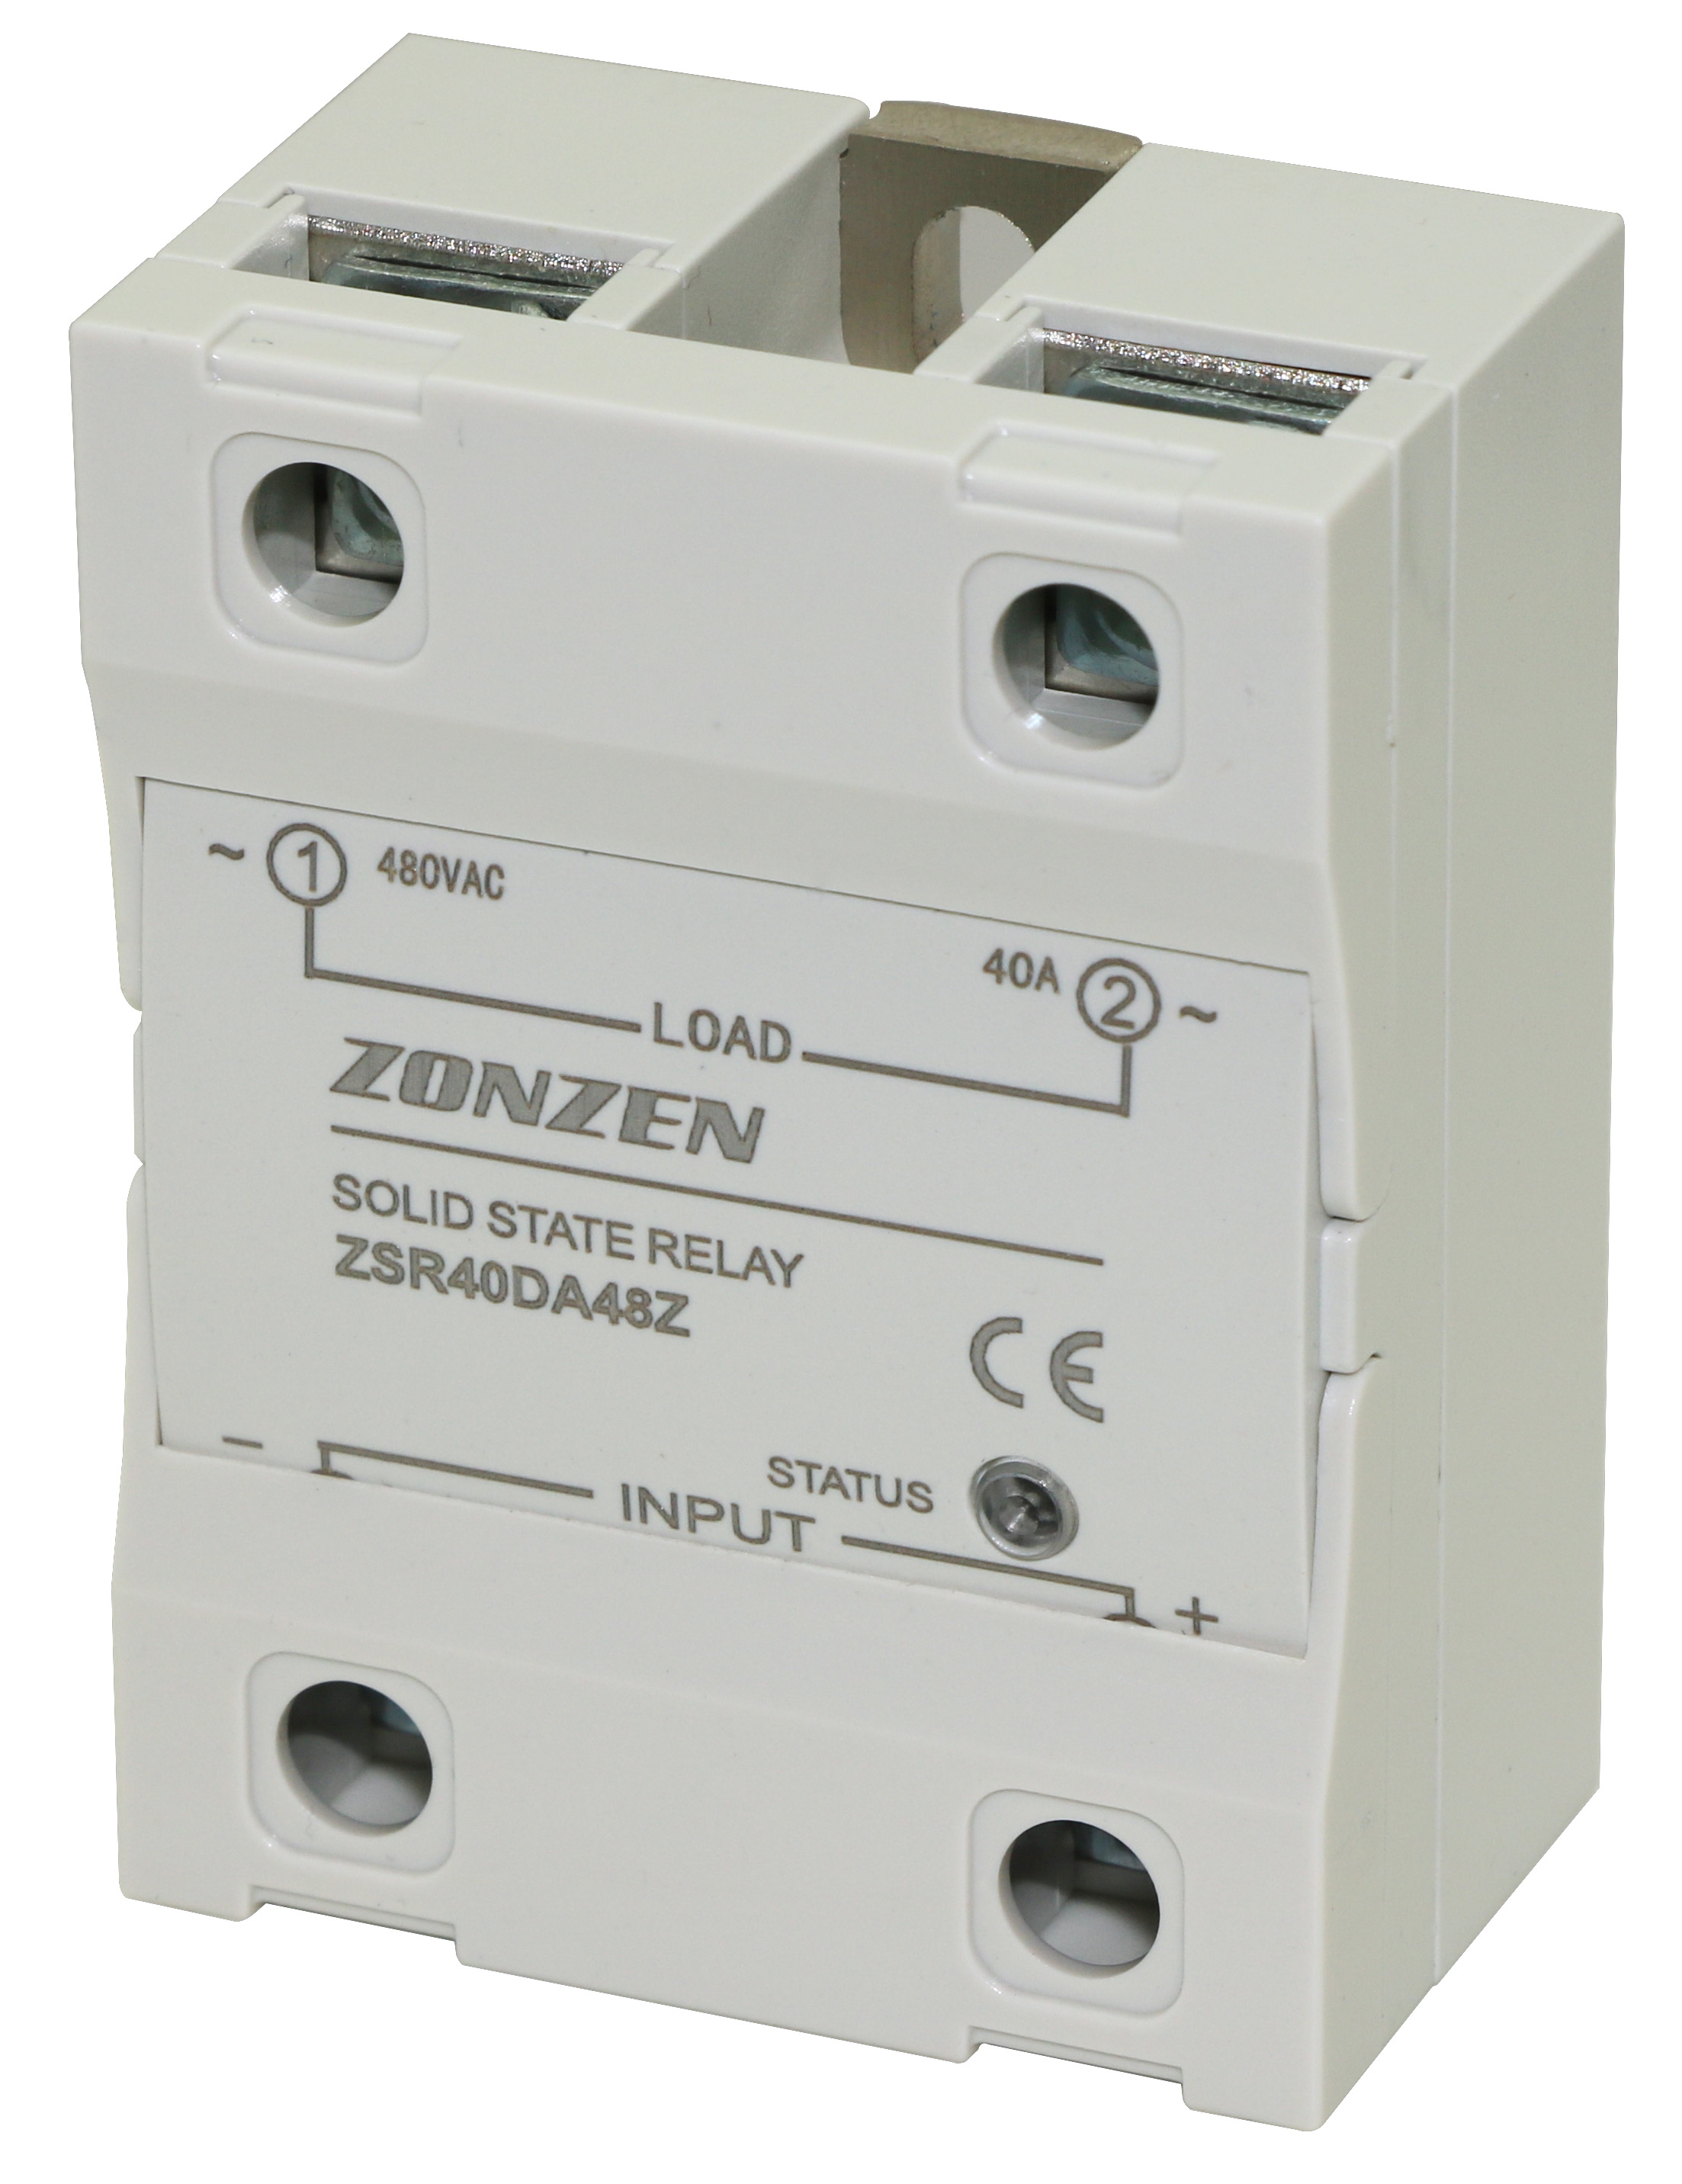 DC to AC Single phase solid state relay(White)